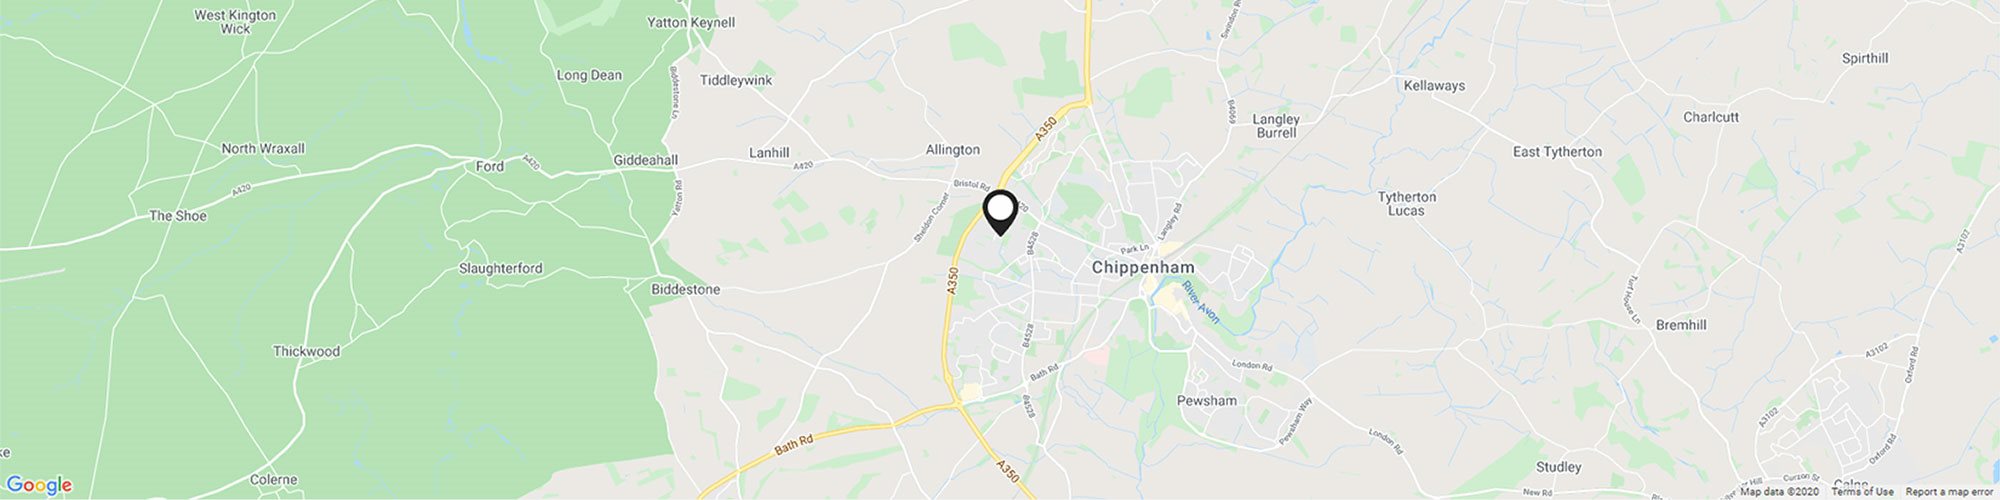 Close up map showing specific Bumpers Farm Chippenham Motor Company location